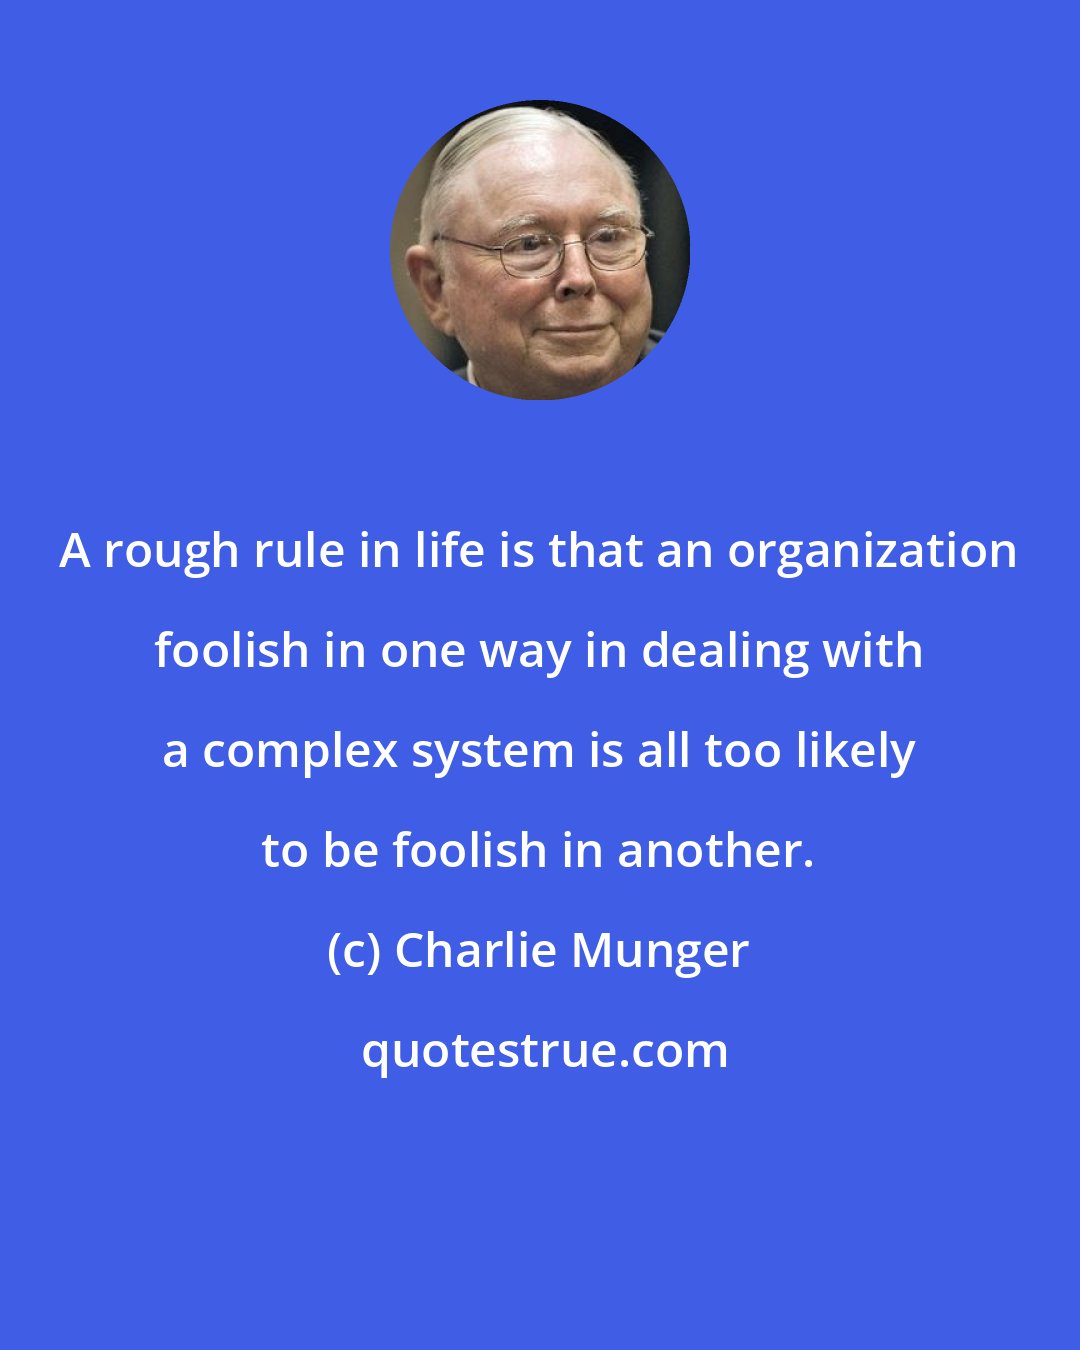 Charlie Munger: A rough rule in life is that an organization foolish in one way in dealing with a complex system is all too likely to be foolish in another.